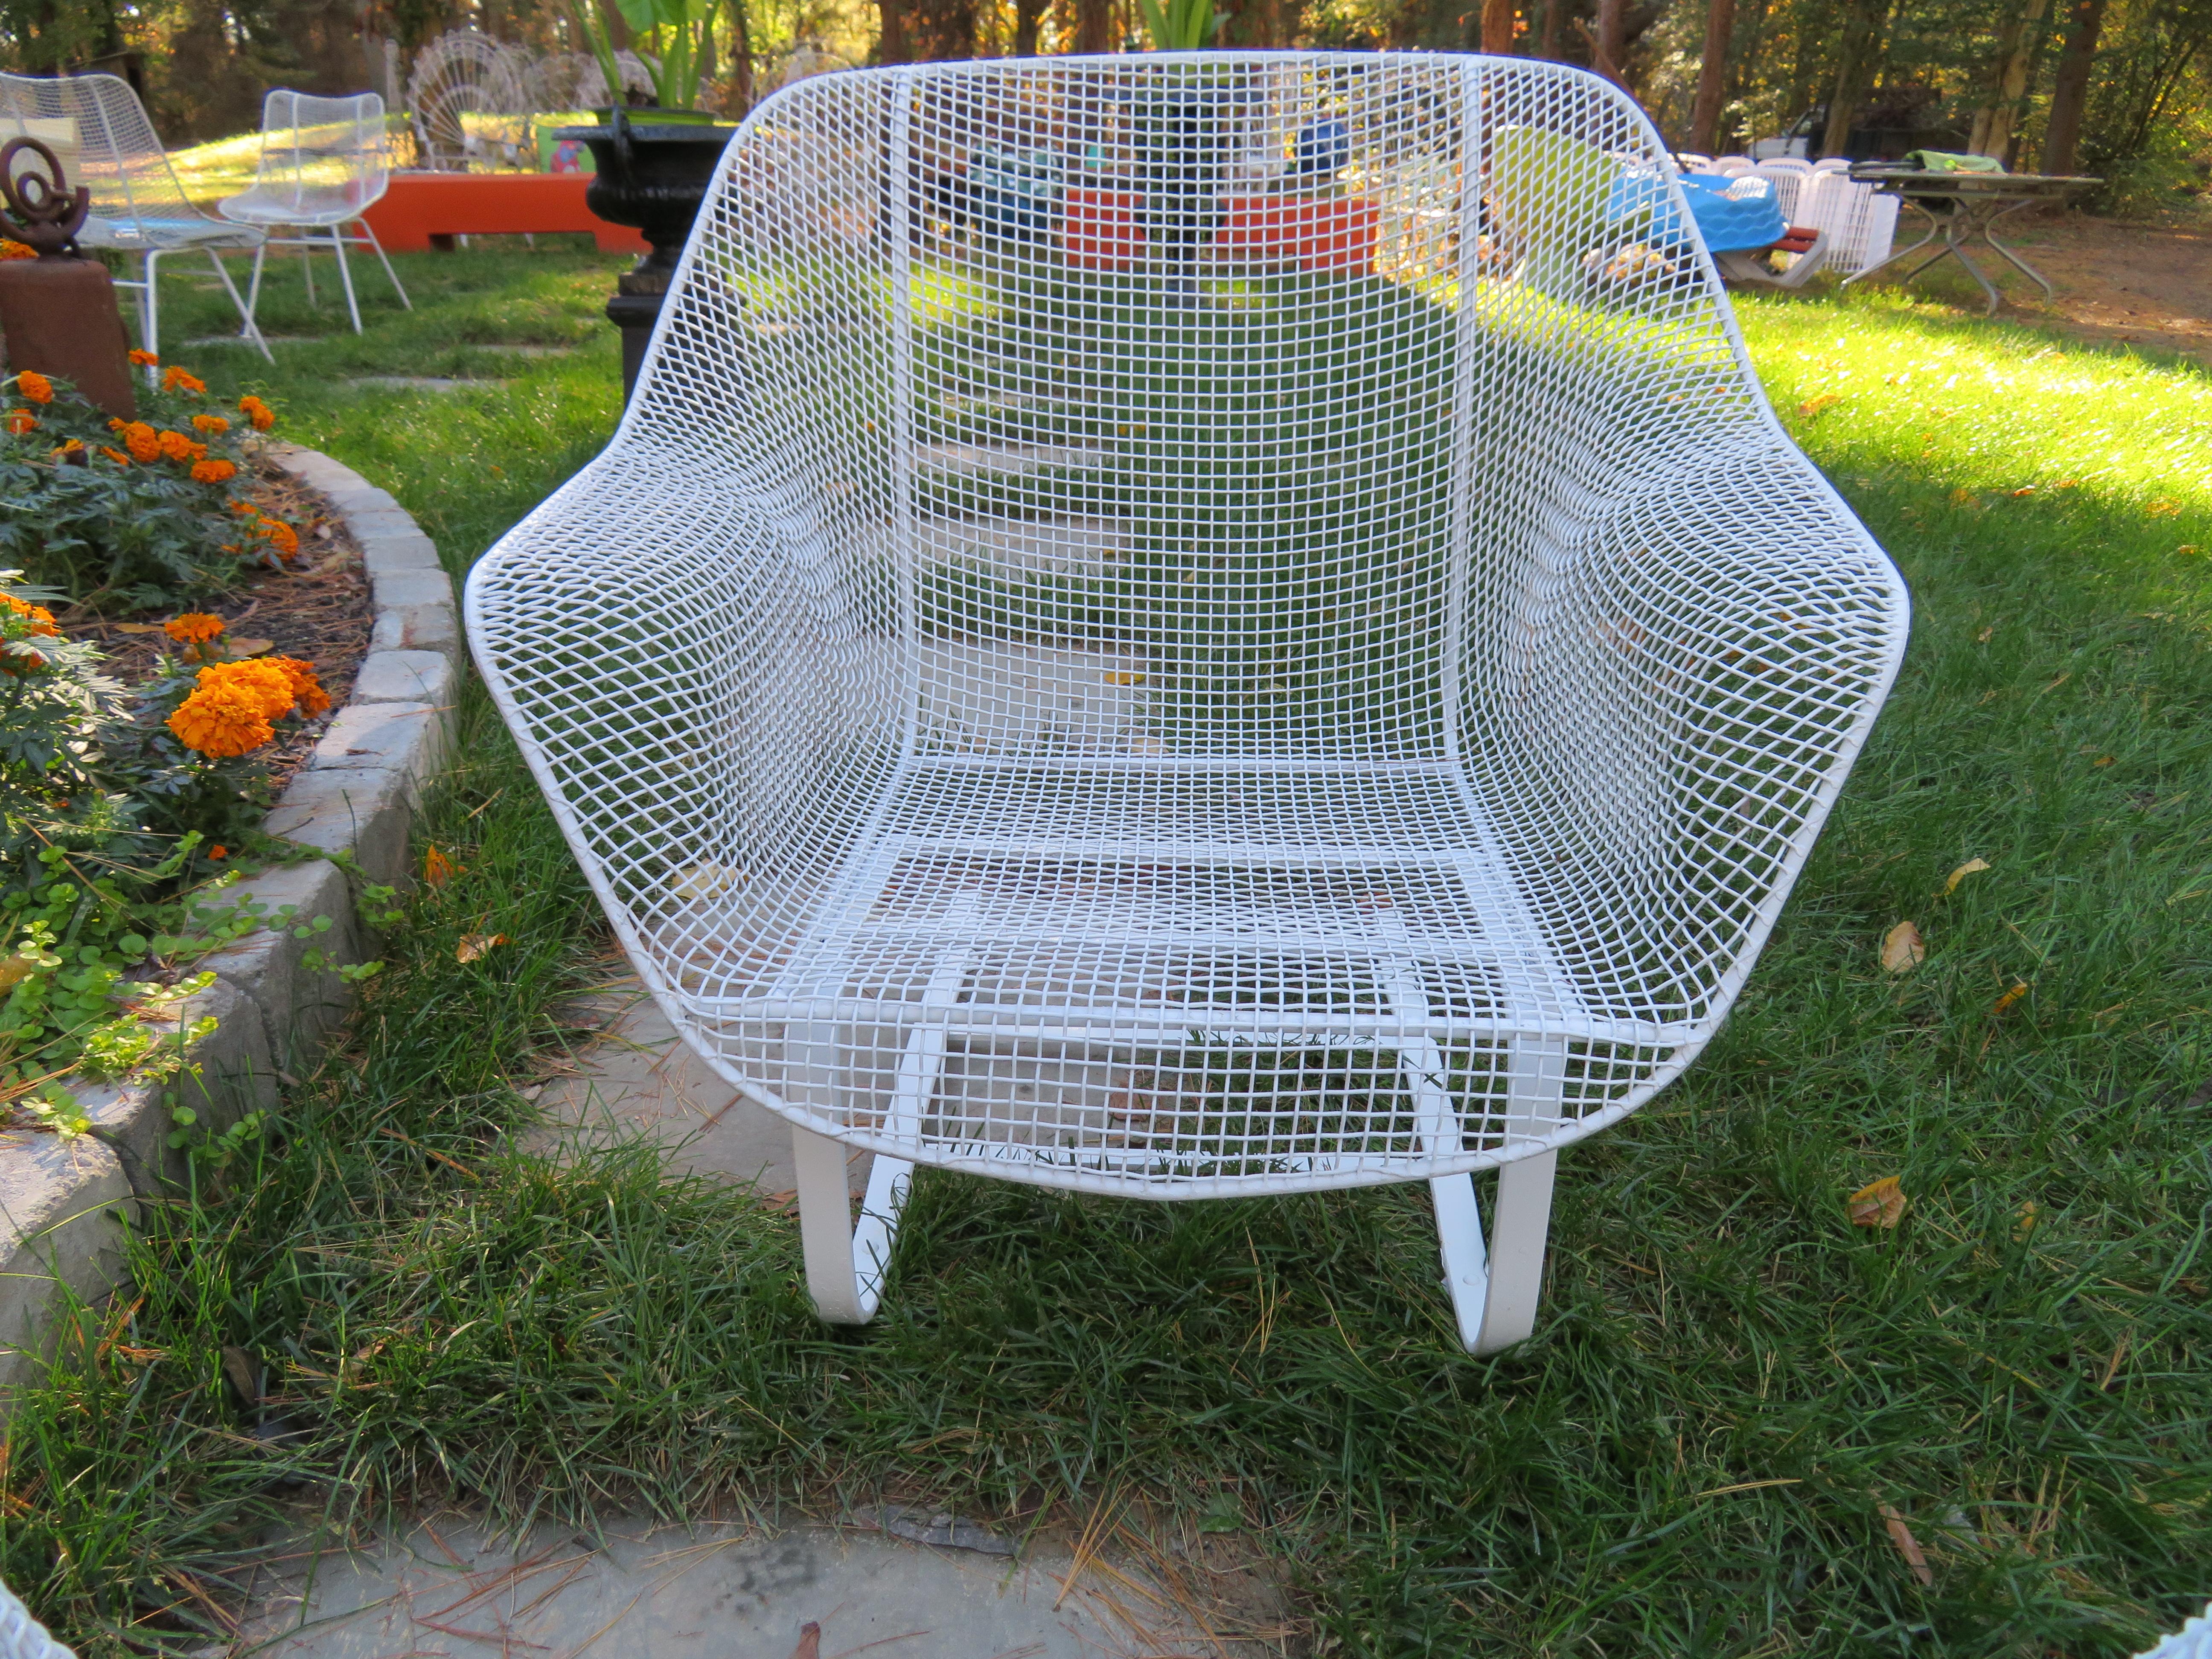 Wonderful pair of 1950s 'Sculptura' lounge chairs designed by John Woodard. Woodard's Sculptura collection was made with wrought iron frames and woven steel mesh seats. These are the largest lounge chairs made by Woodard and have the more desirable